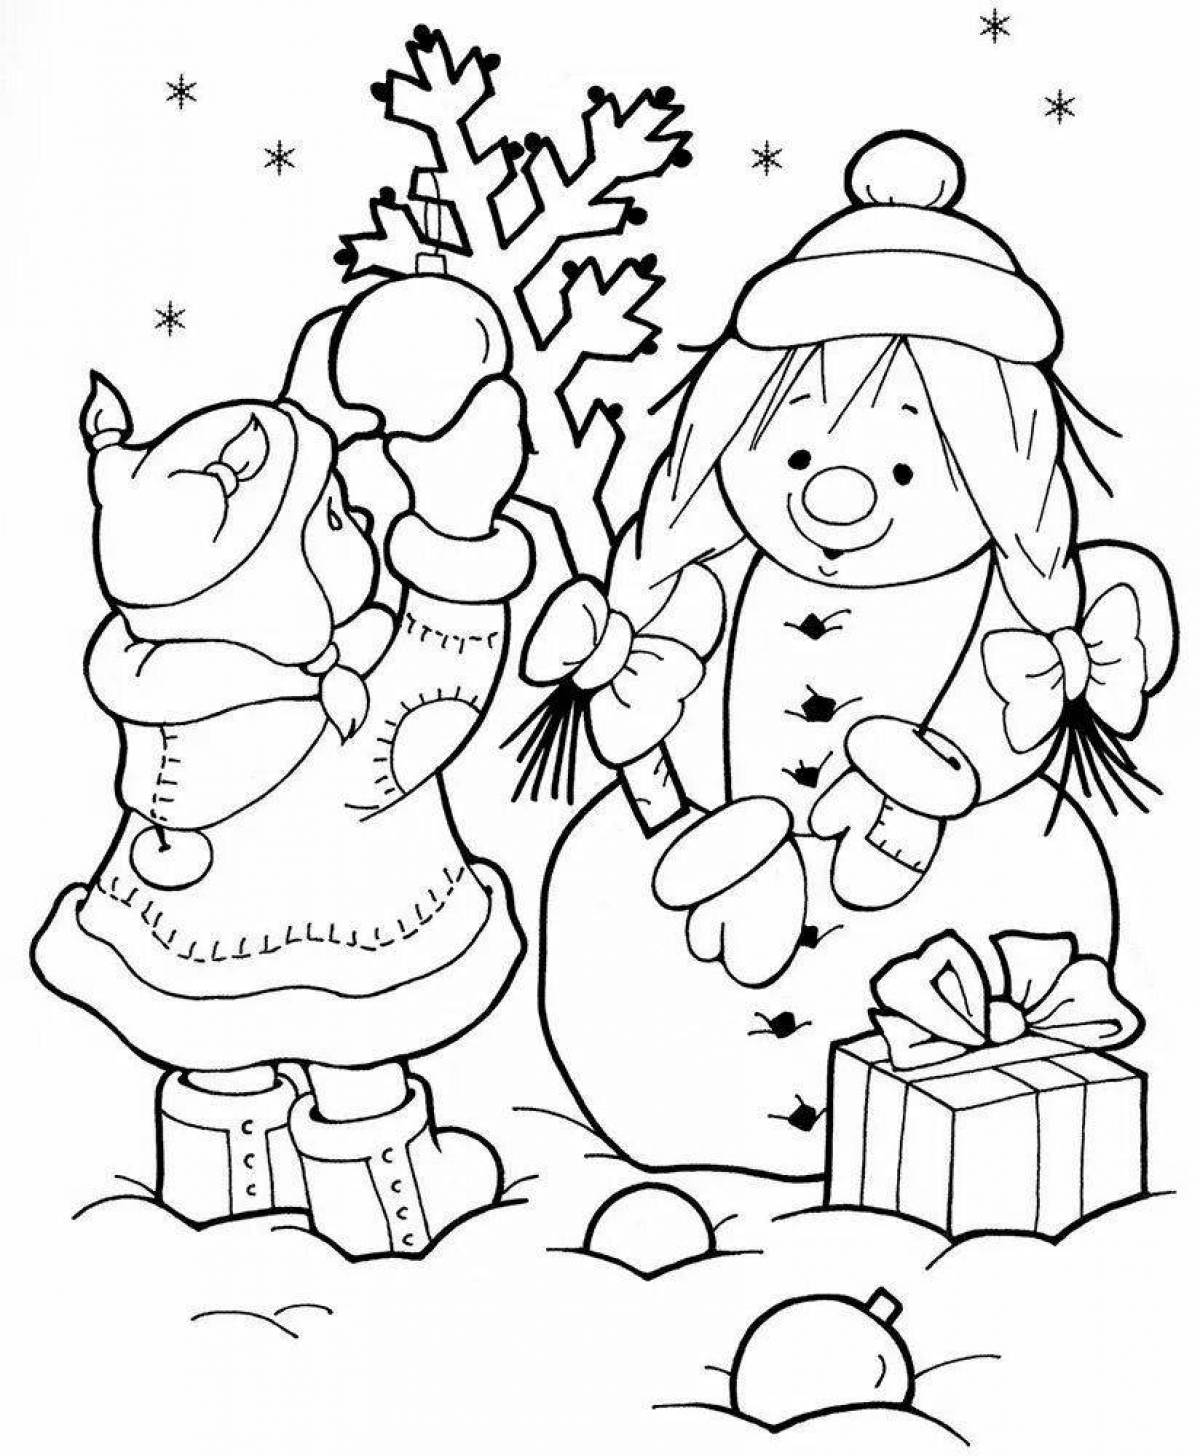 Exquisite winter coloring book for kids